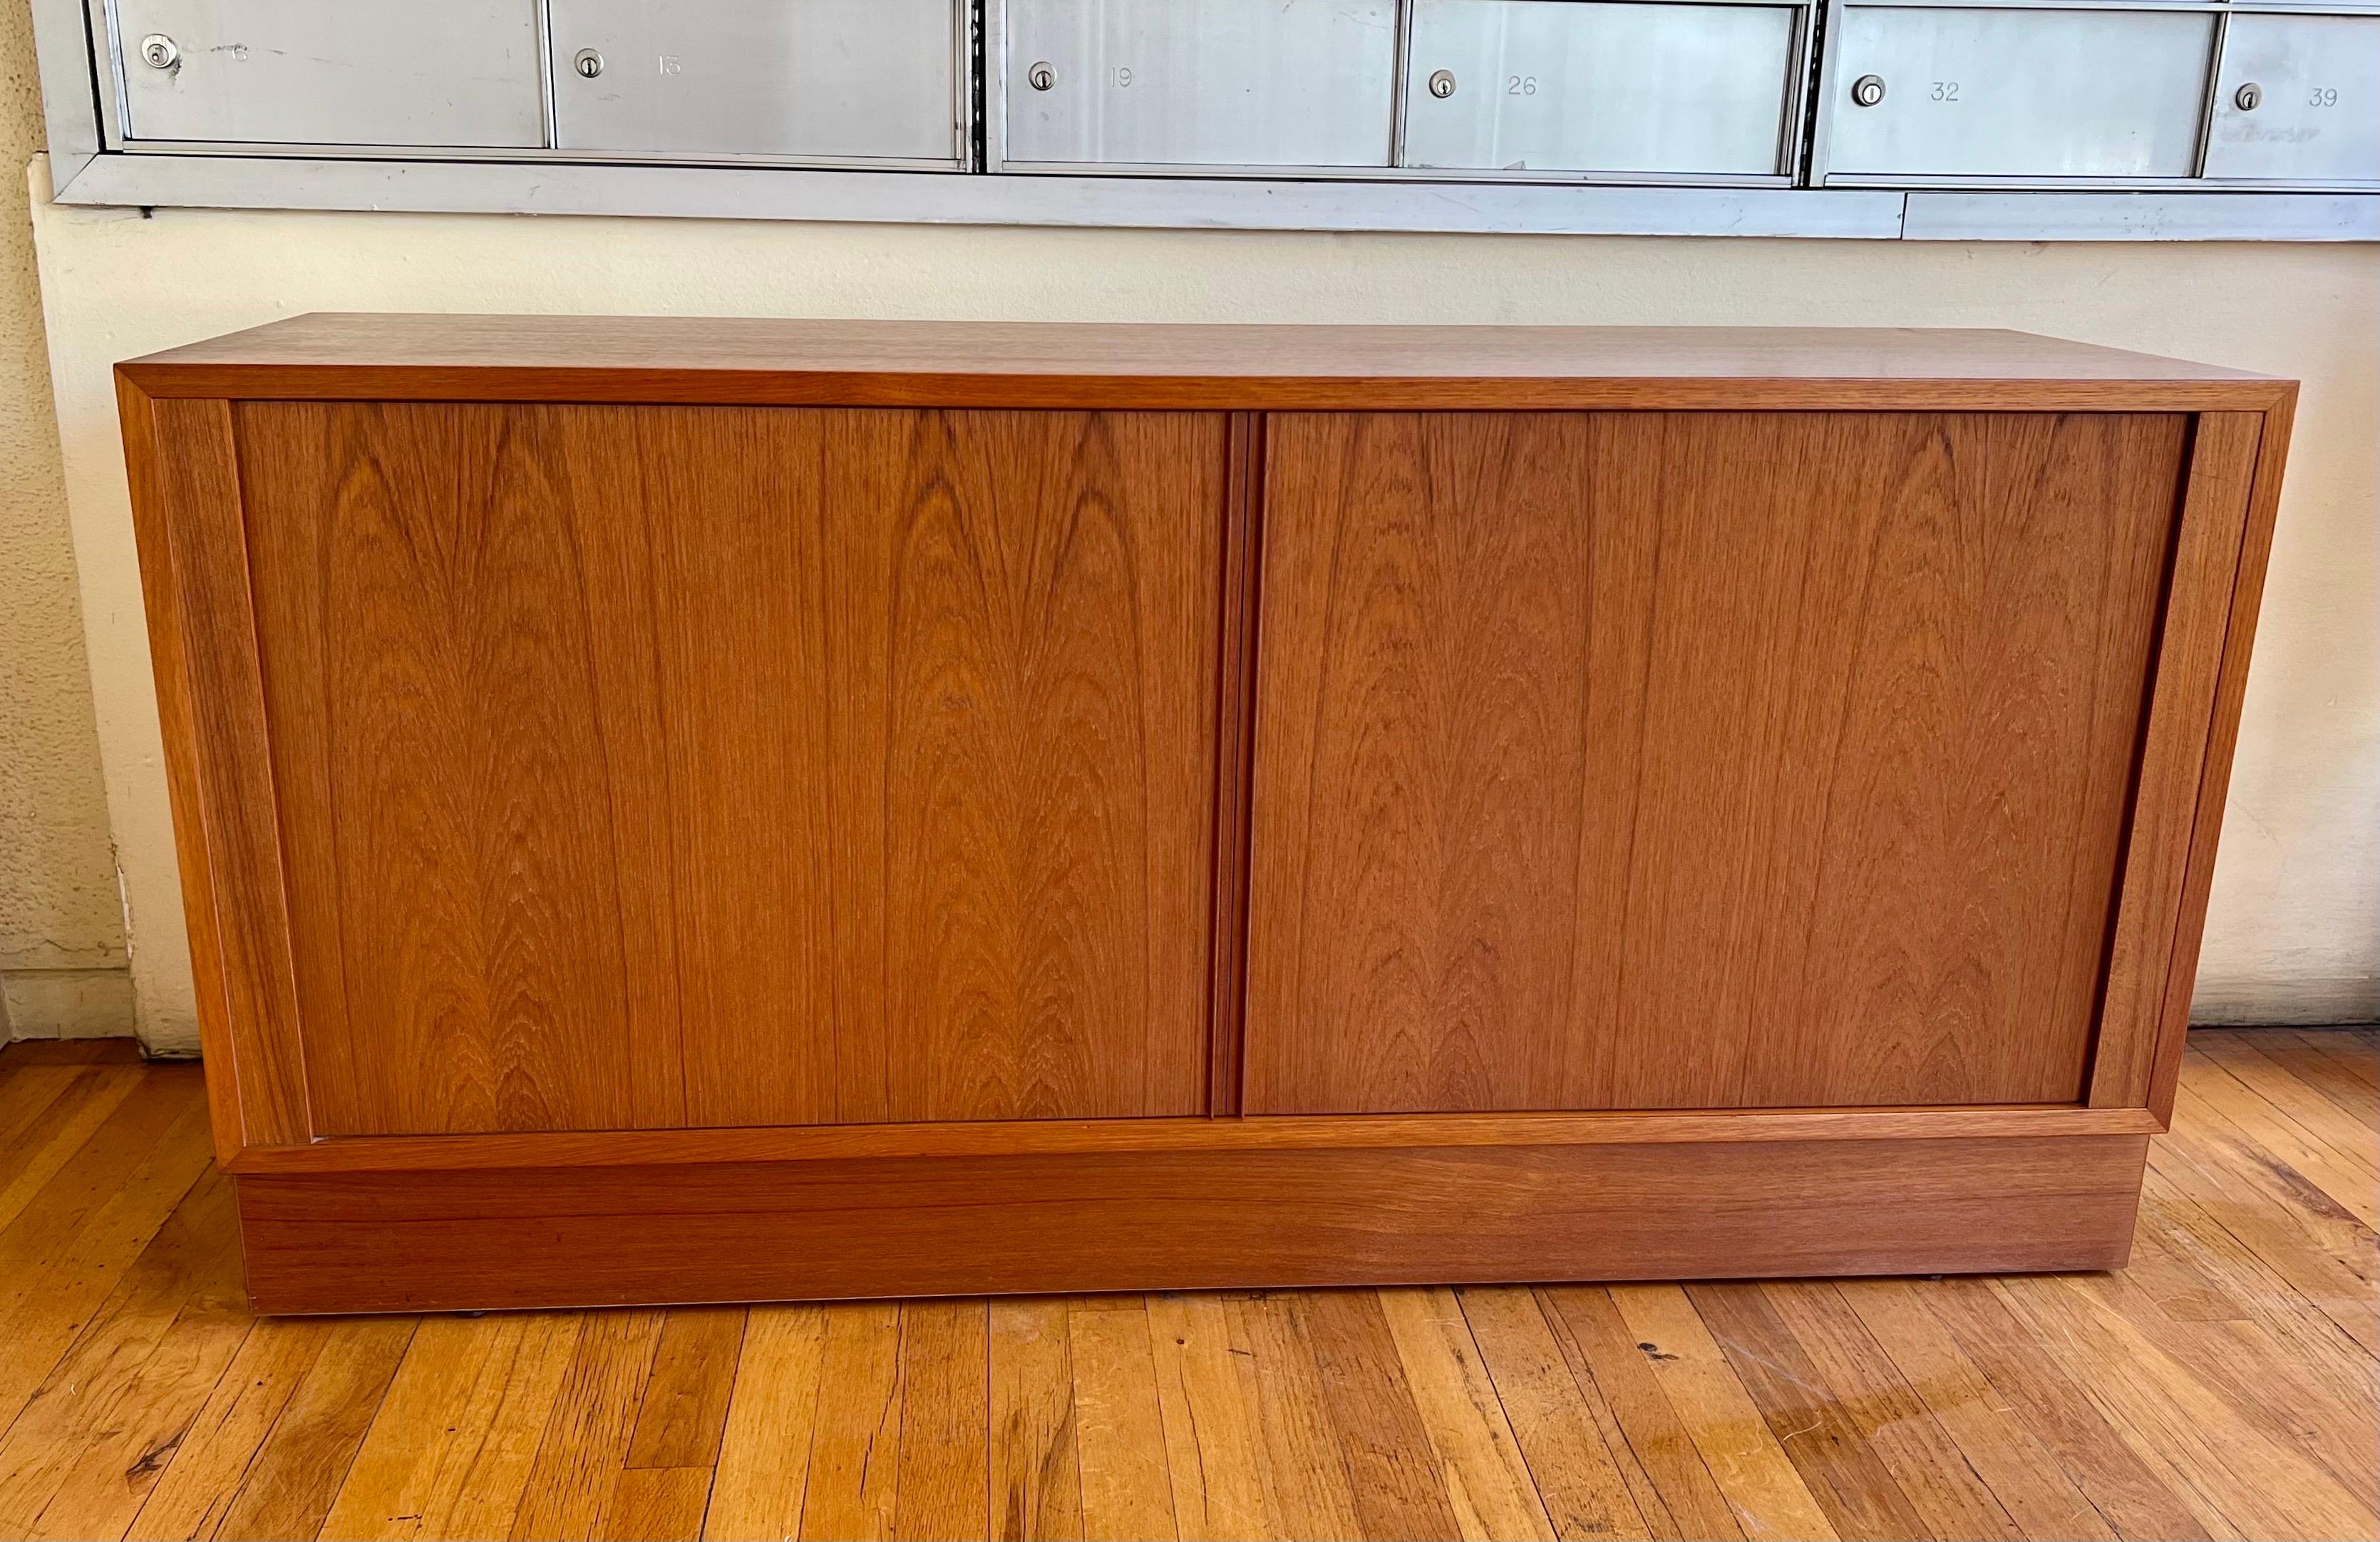 Versatile tambour door teak credenza by Carlo Jensen for Poul Hundevad. Made in the 1960s in Denmark, it features super thin vertical pulls running the length of the doors. The secondary wood is birch and the divided, nice clean original finish.